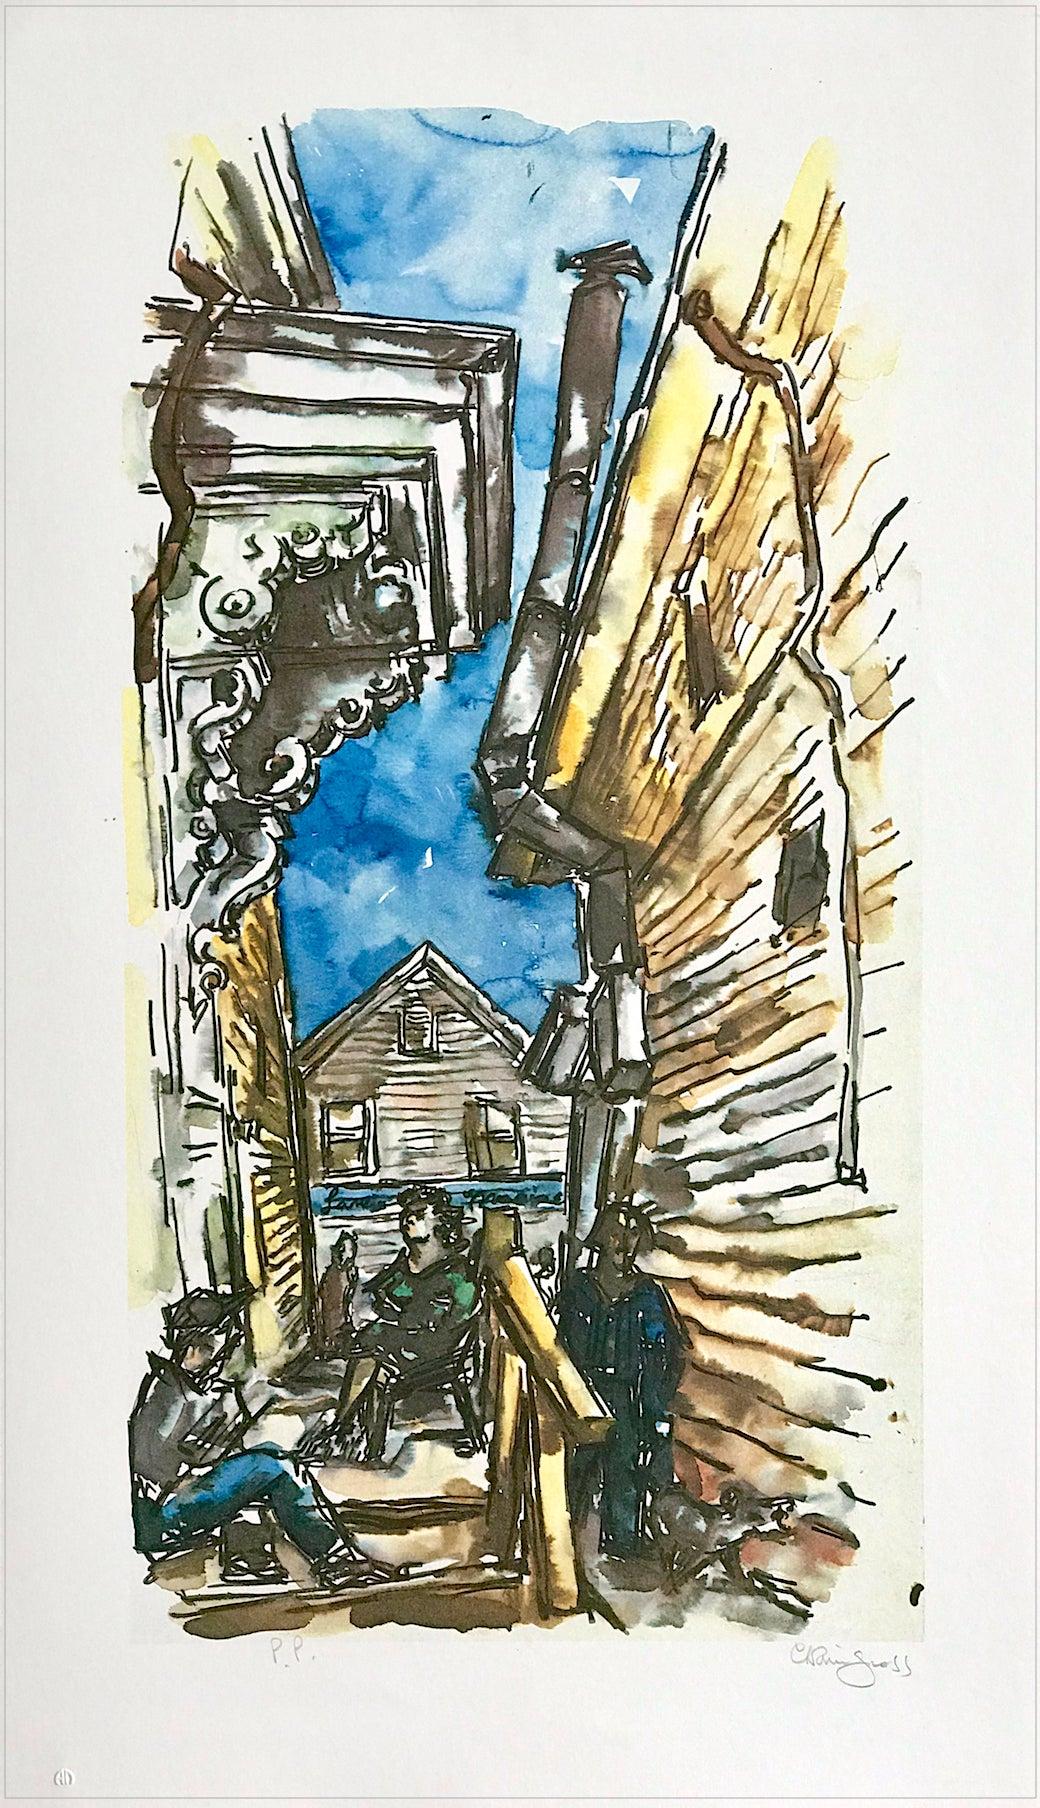 Chaim Gross Figurative Print - PROVINCETOWN SIDE STREET Signed Lithograph, New England Cape Cod White Clapboard